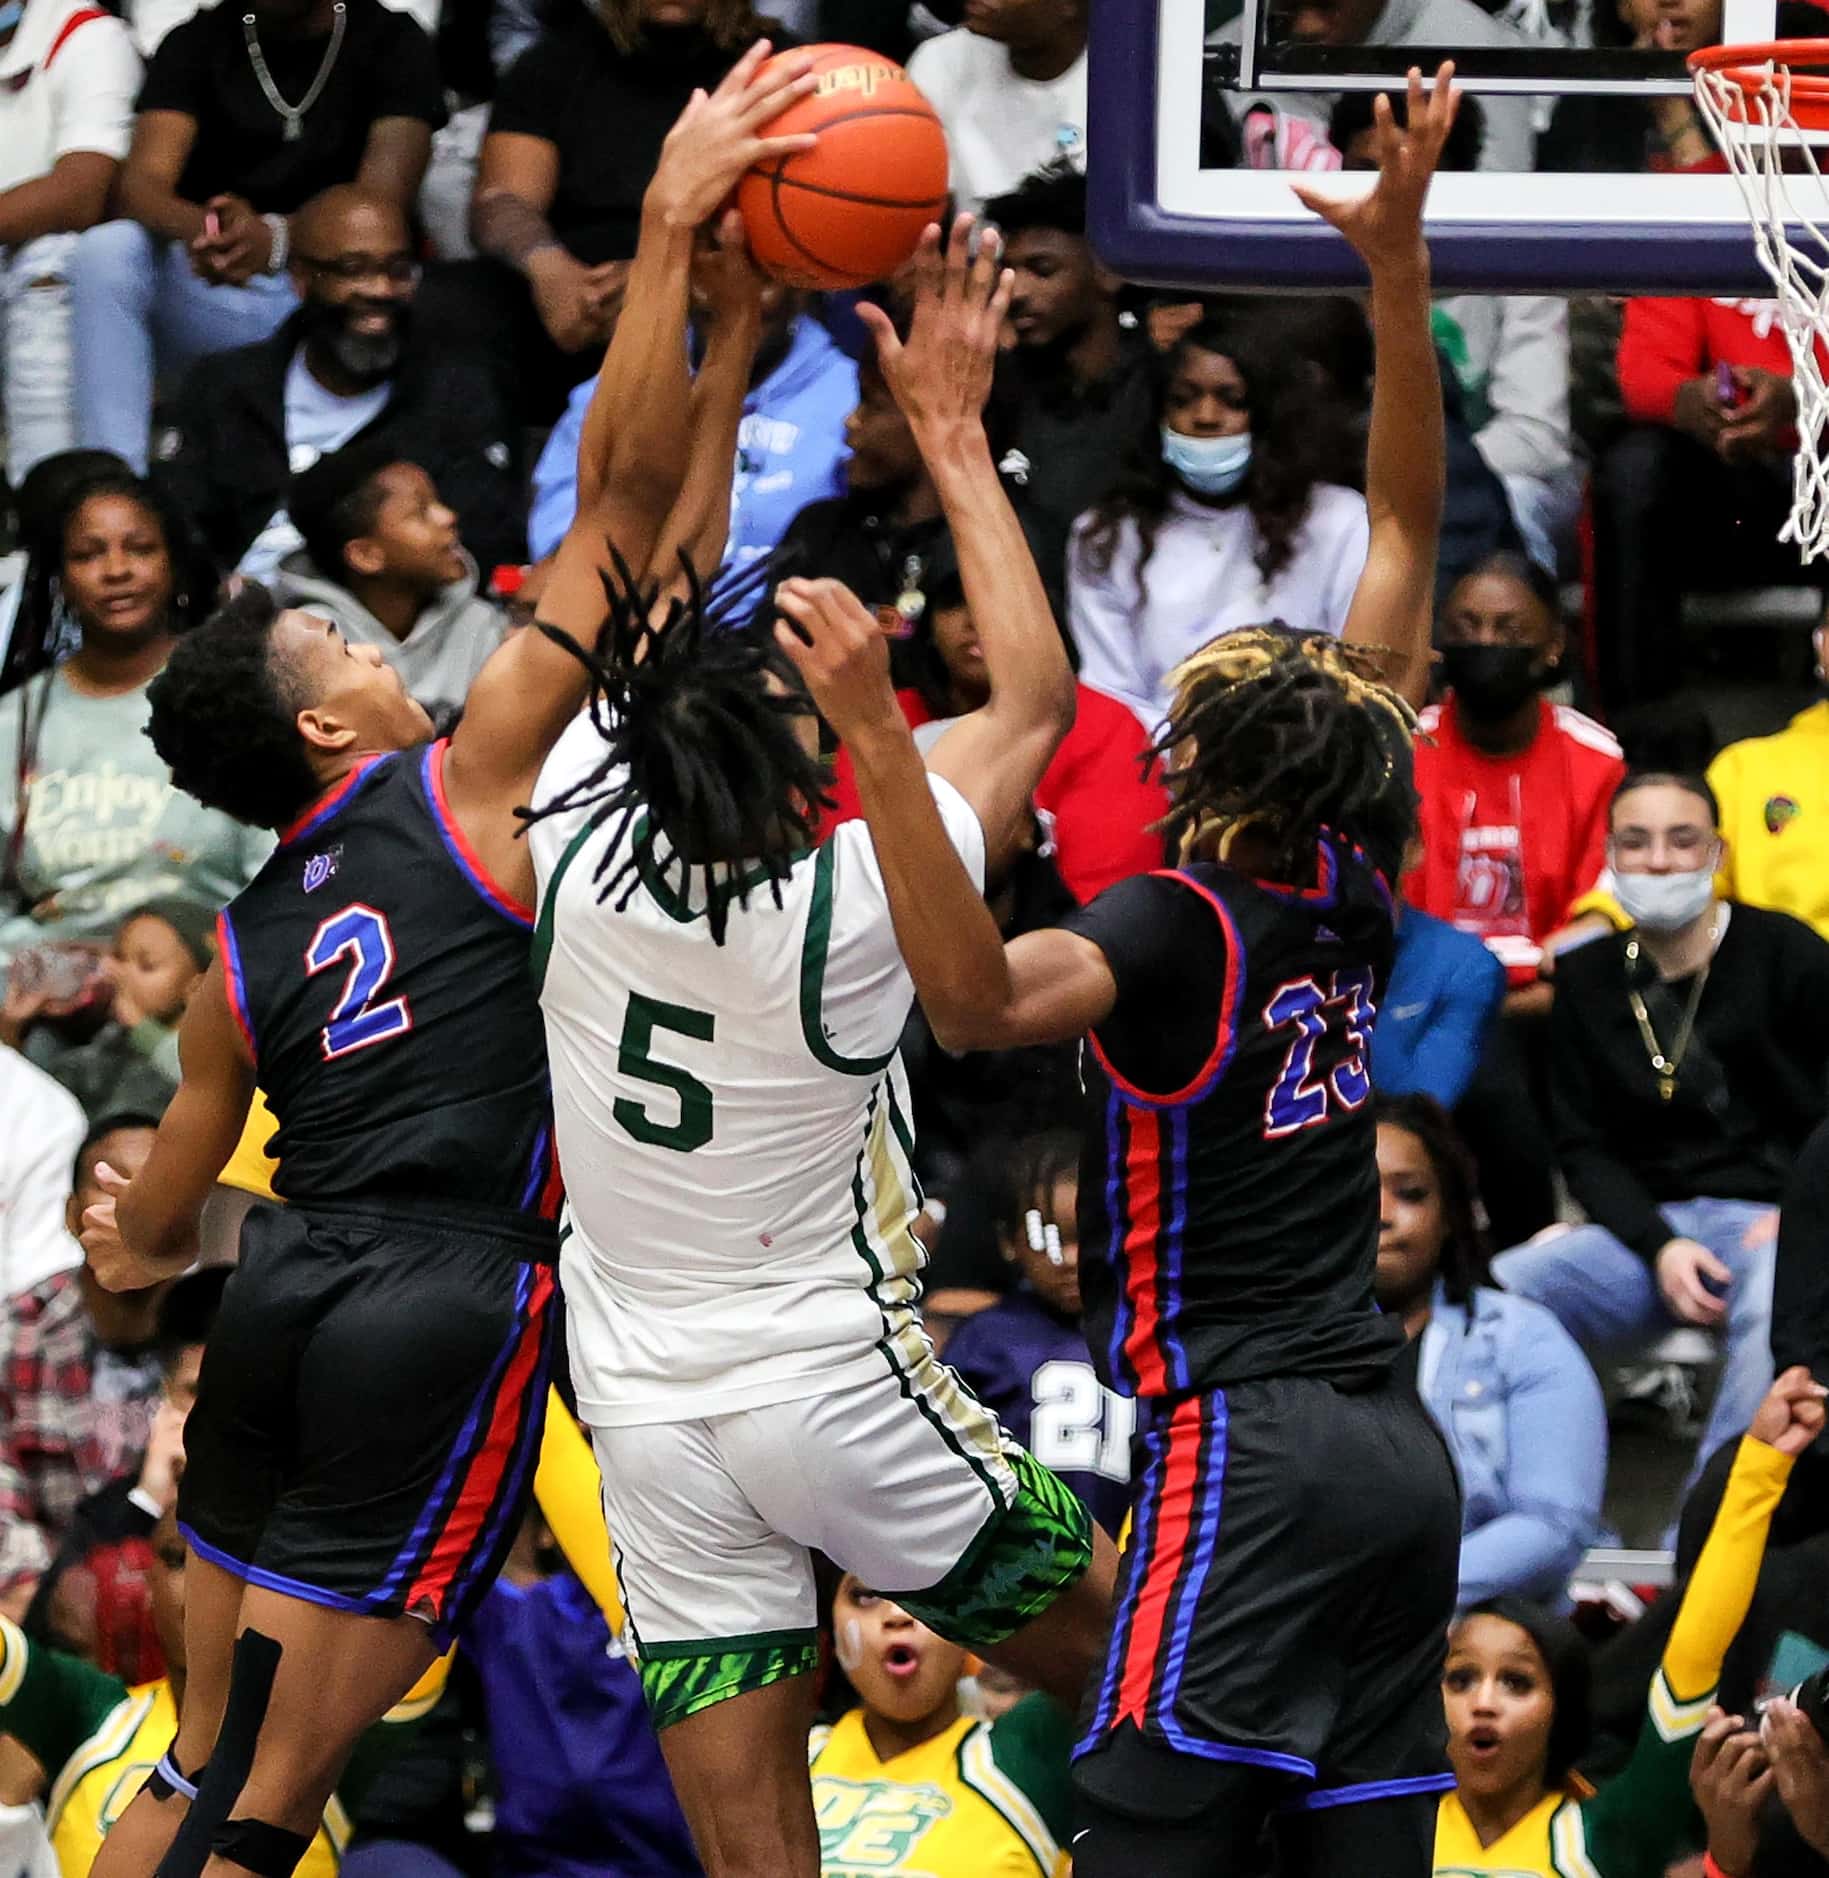 DeSoto forward Ahmir Wall (5) goes strong to the basket against Duncanville Evan Phelps (2)...